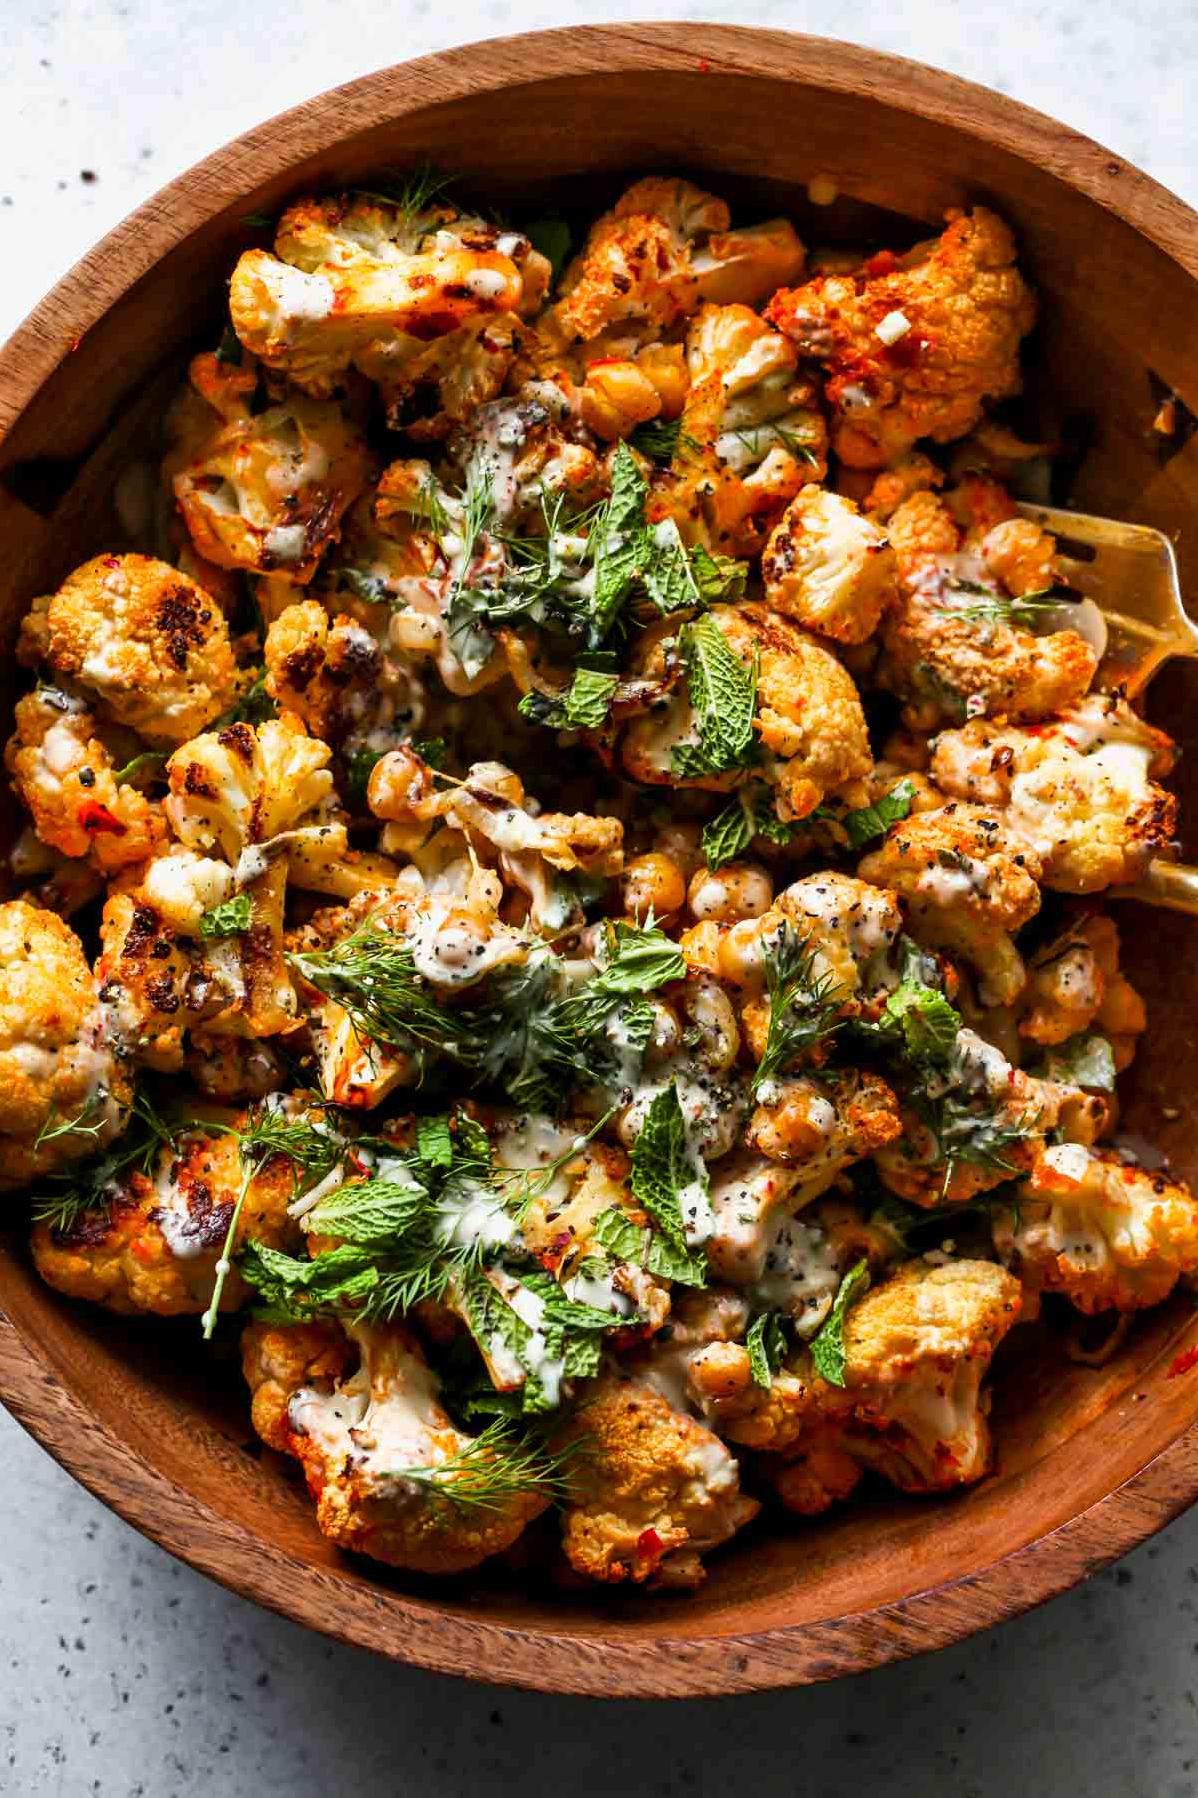  Harissa is the star of the show in this crowd-pleasing roasted cauliflower recipe